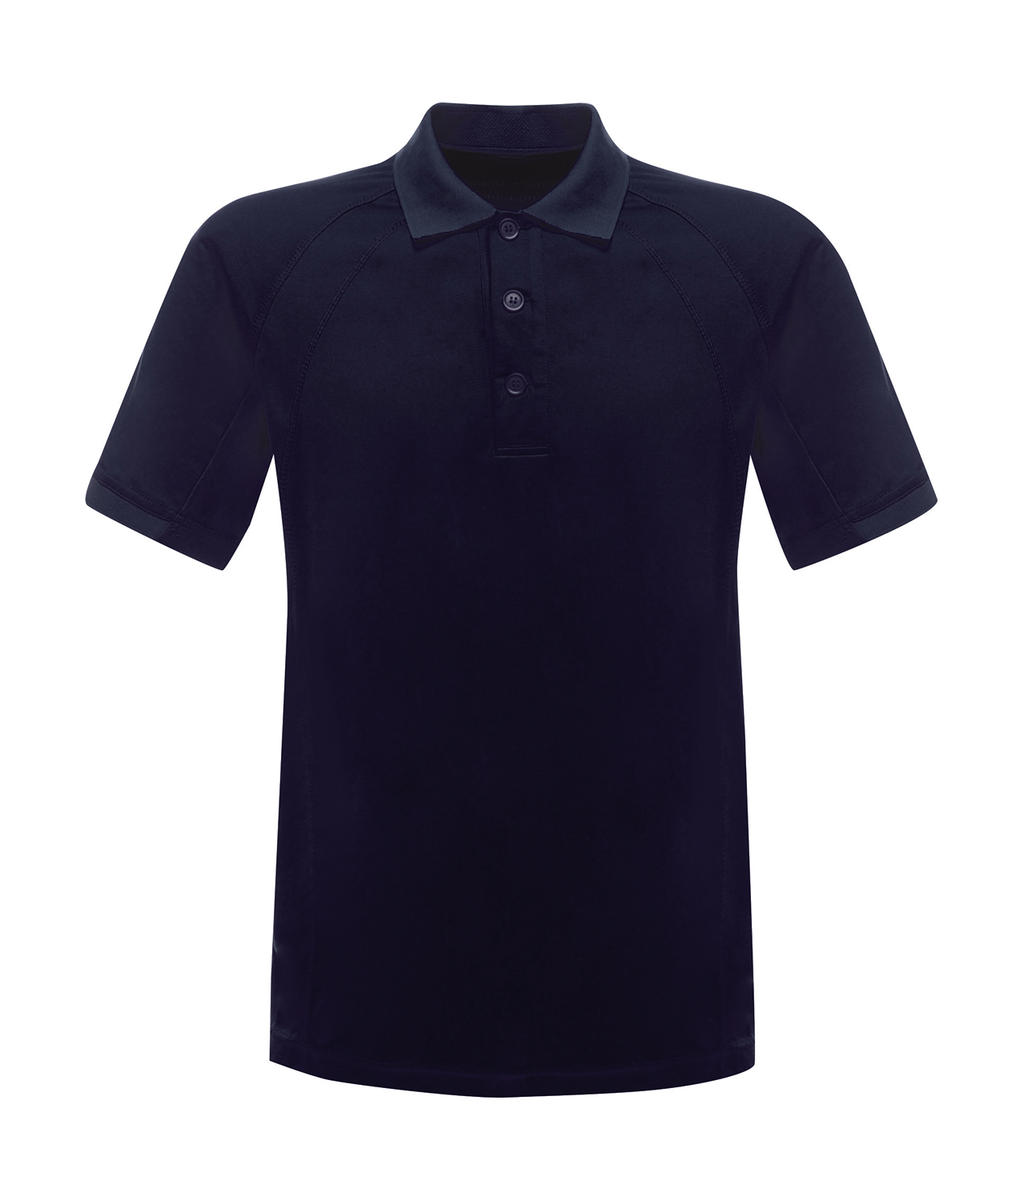  Coolweave Wicking Polo in Farbe Navy